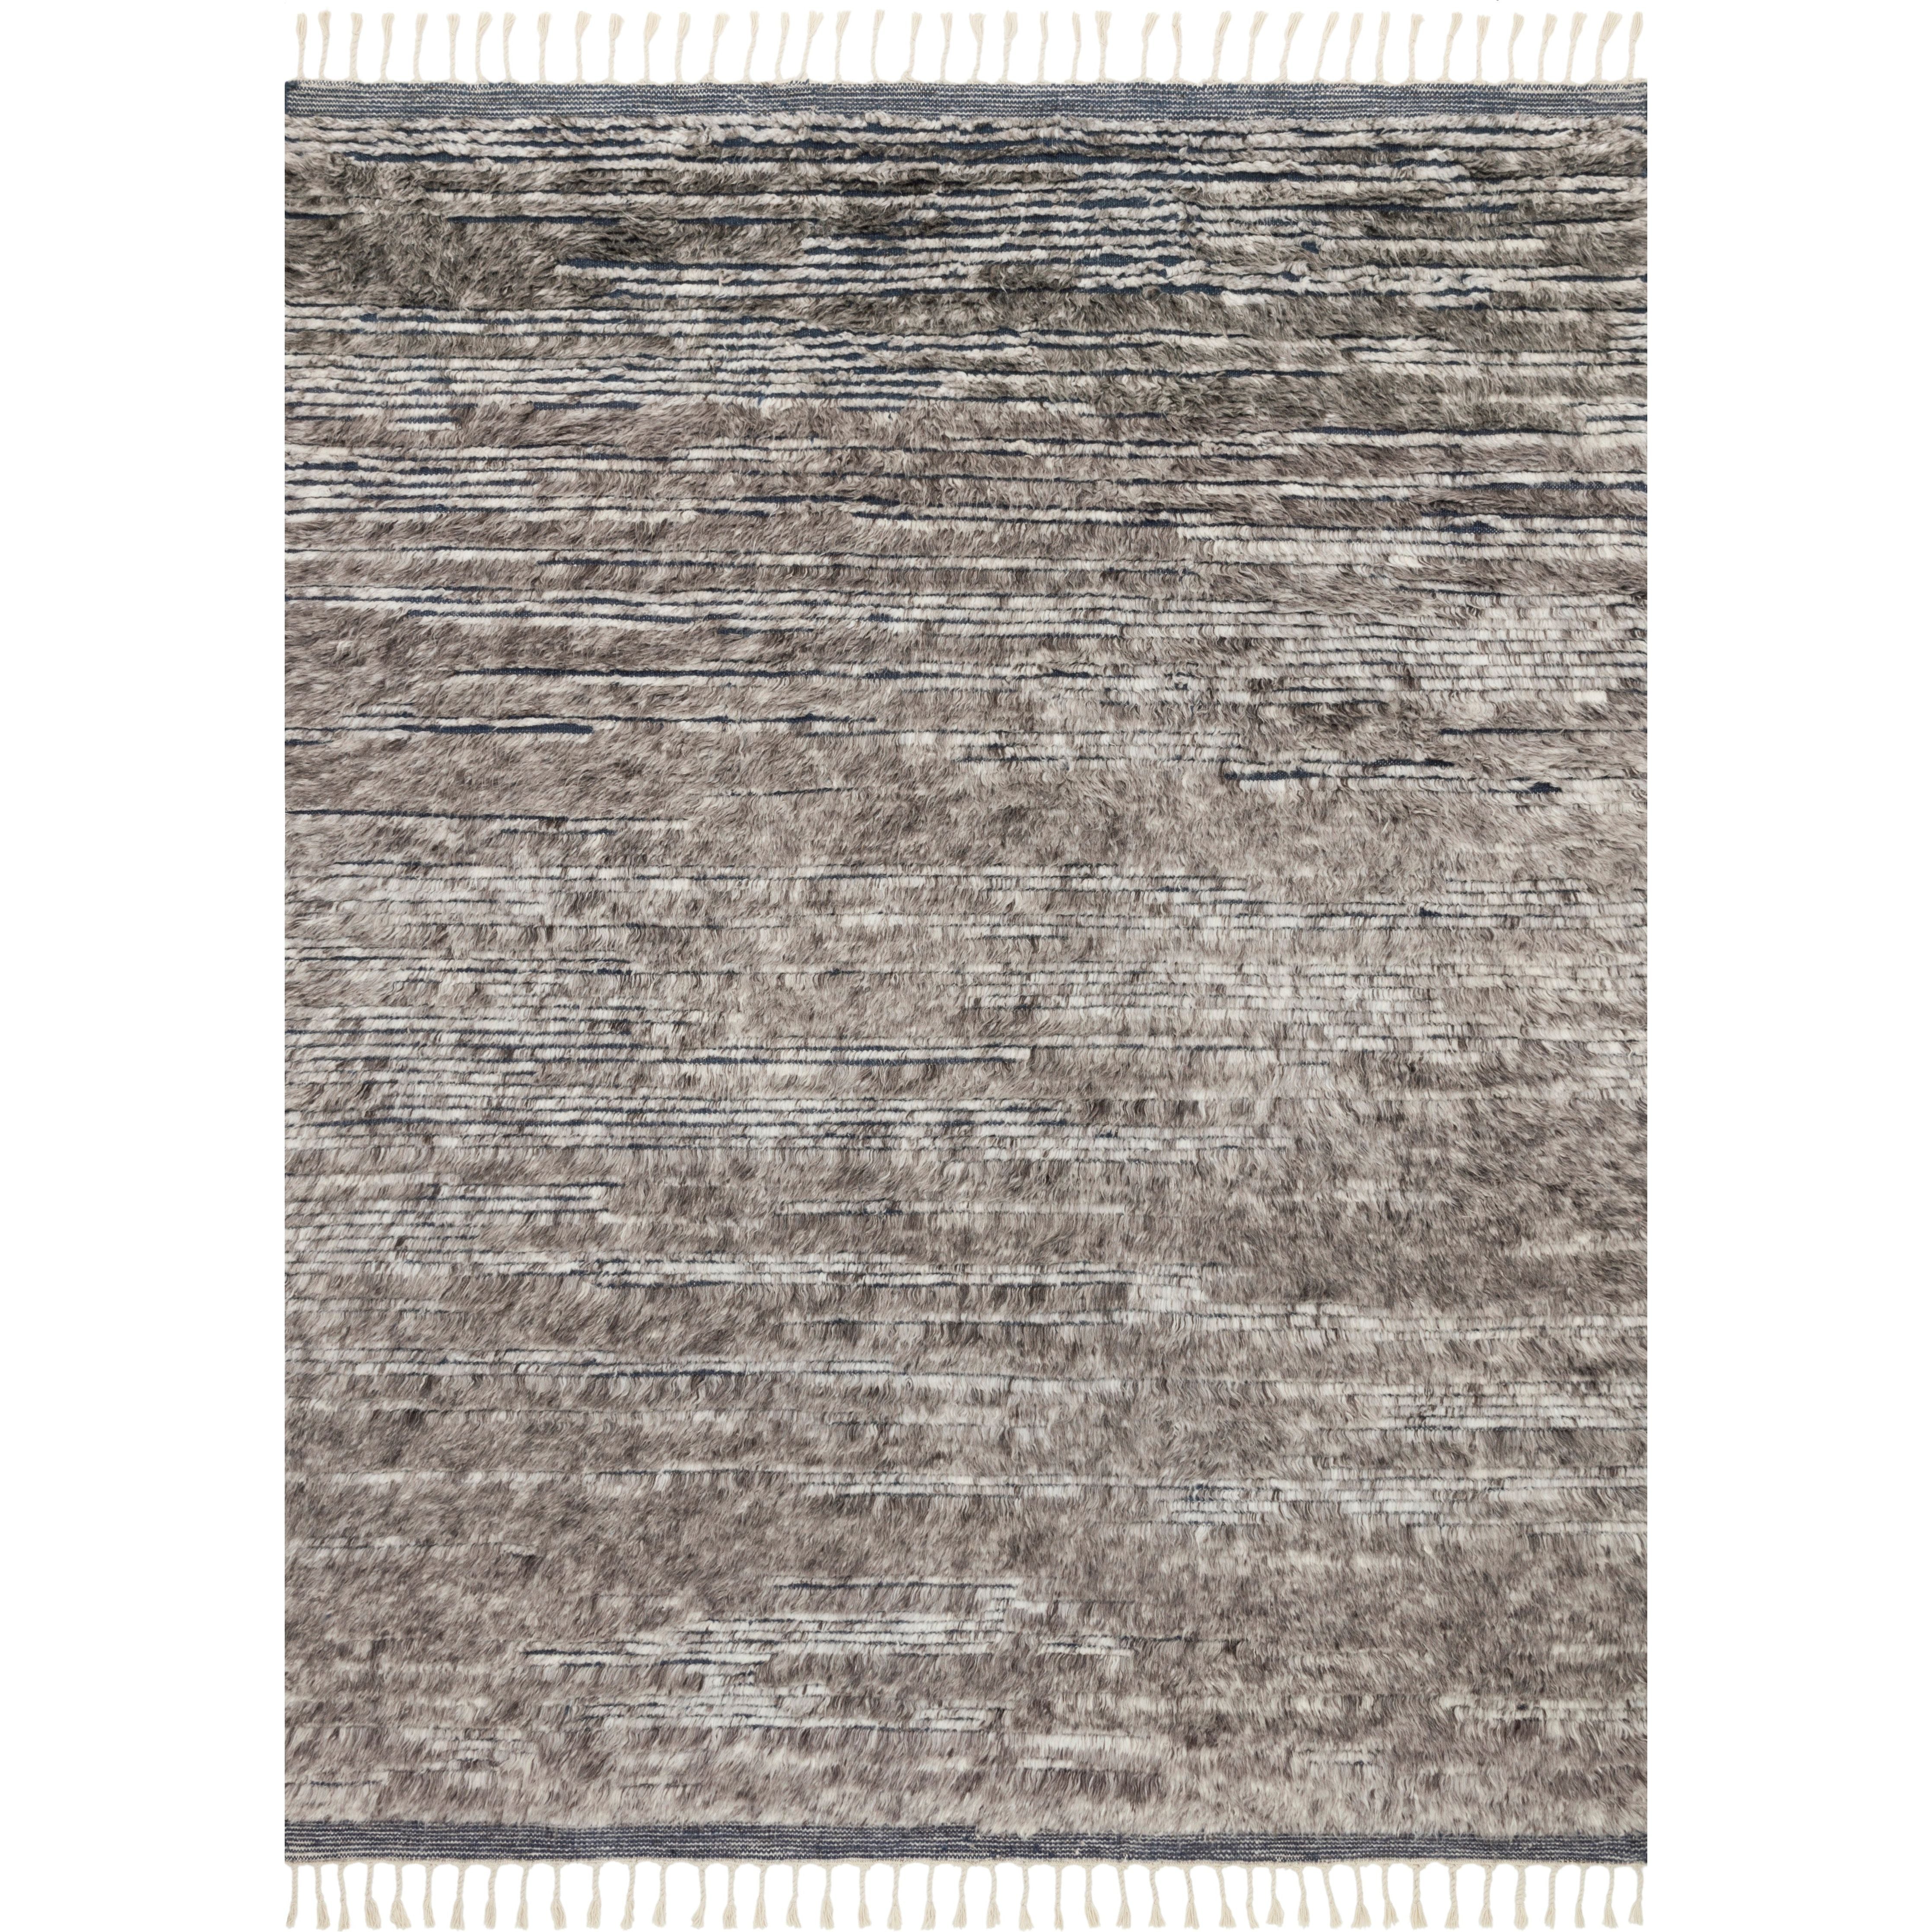 A nod to timeless Moroccan style, the Khalid Pewter/Ink or KF-04 Pewter/Ink, is hand-knotted in India by skilled artisans. The soft pile features 100% natural, undyed wool, lending slight variations in tones that make each piece it's own. Plus, each rug is finished with a thoughtfully designed fringe. 